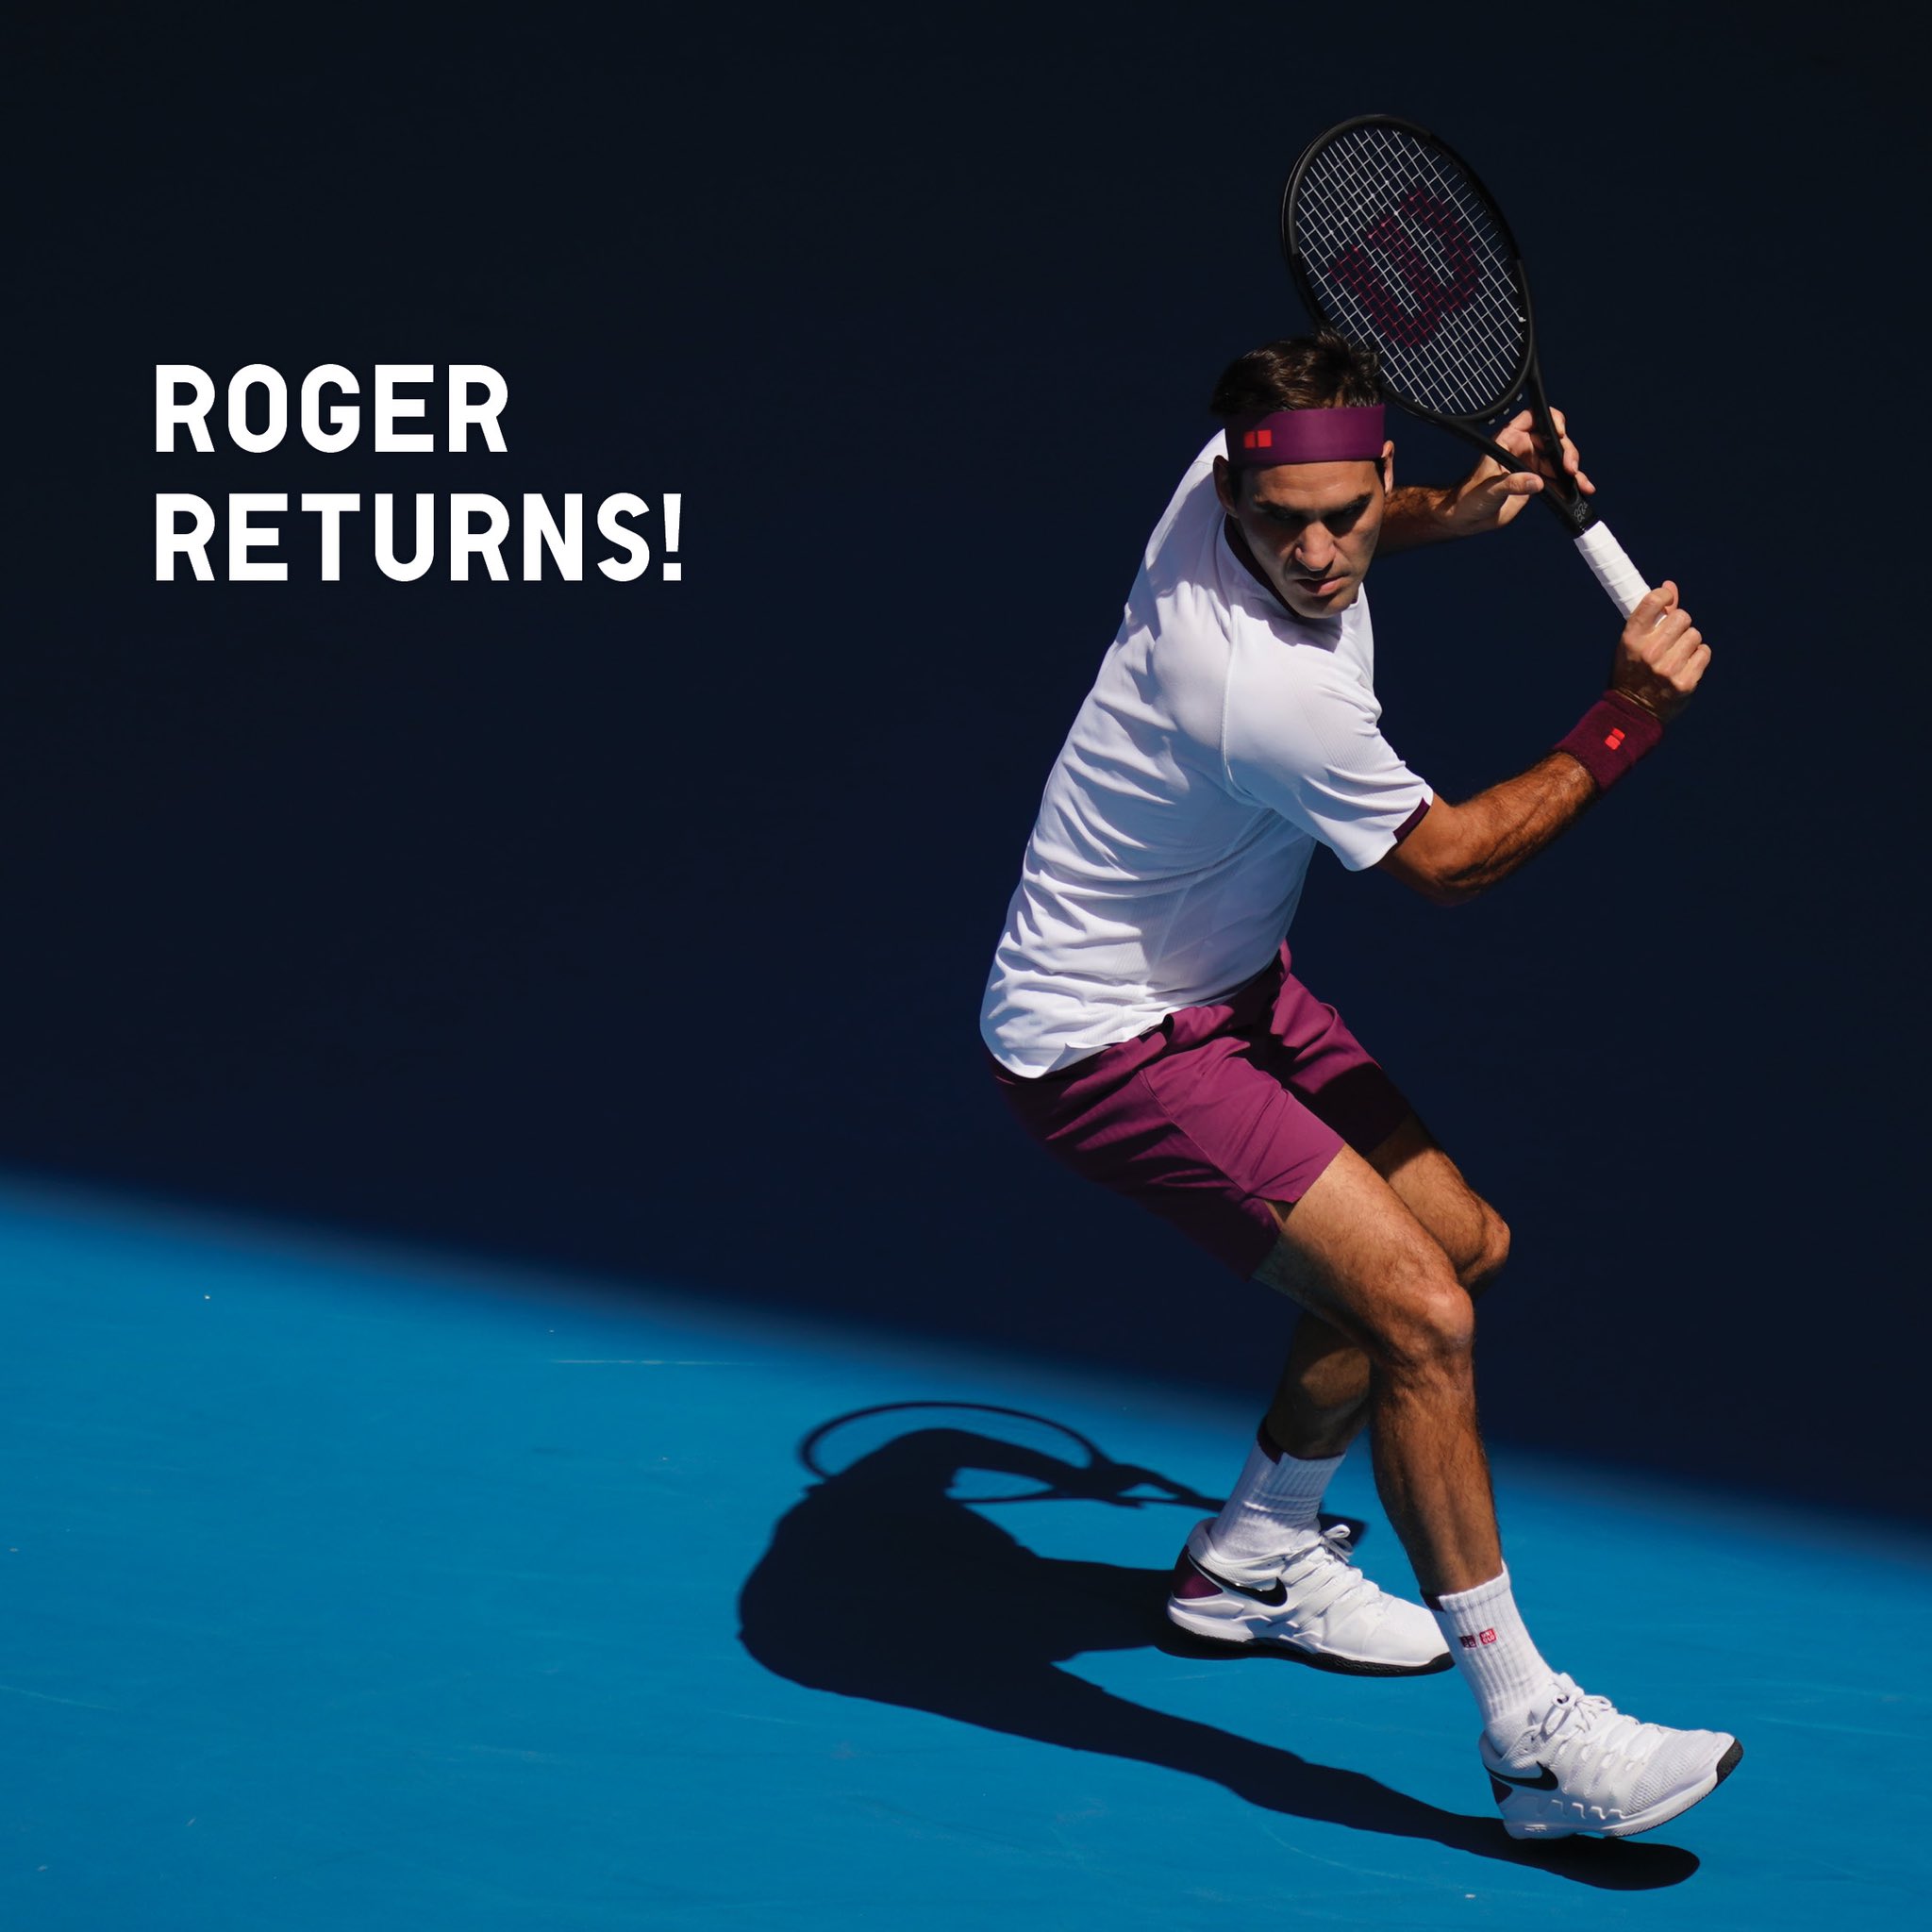 Uniqlo Ambassadors Help Us Celebrate His Return To World Competition It S Always Exciting When Roger Is In The Game 3月8日から始まるカタールでの大会で フェデラー選手がいよいよ復帰 フェデラー選手の復帰を心から待ち望んでいたファンの